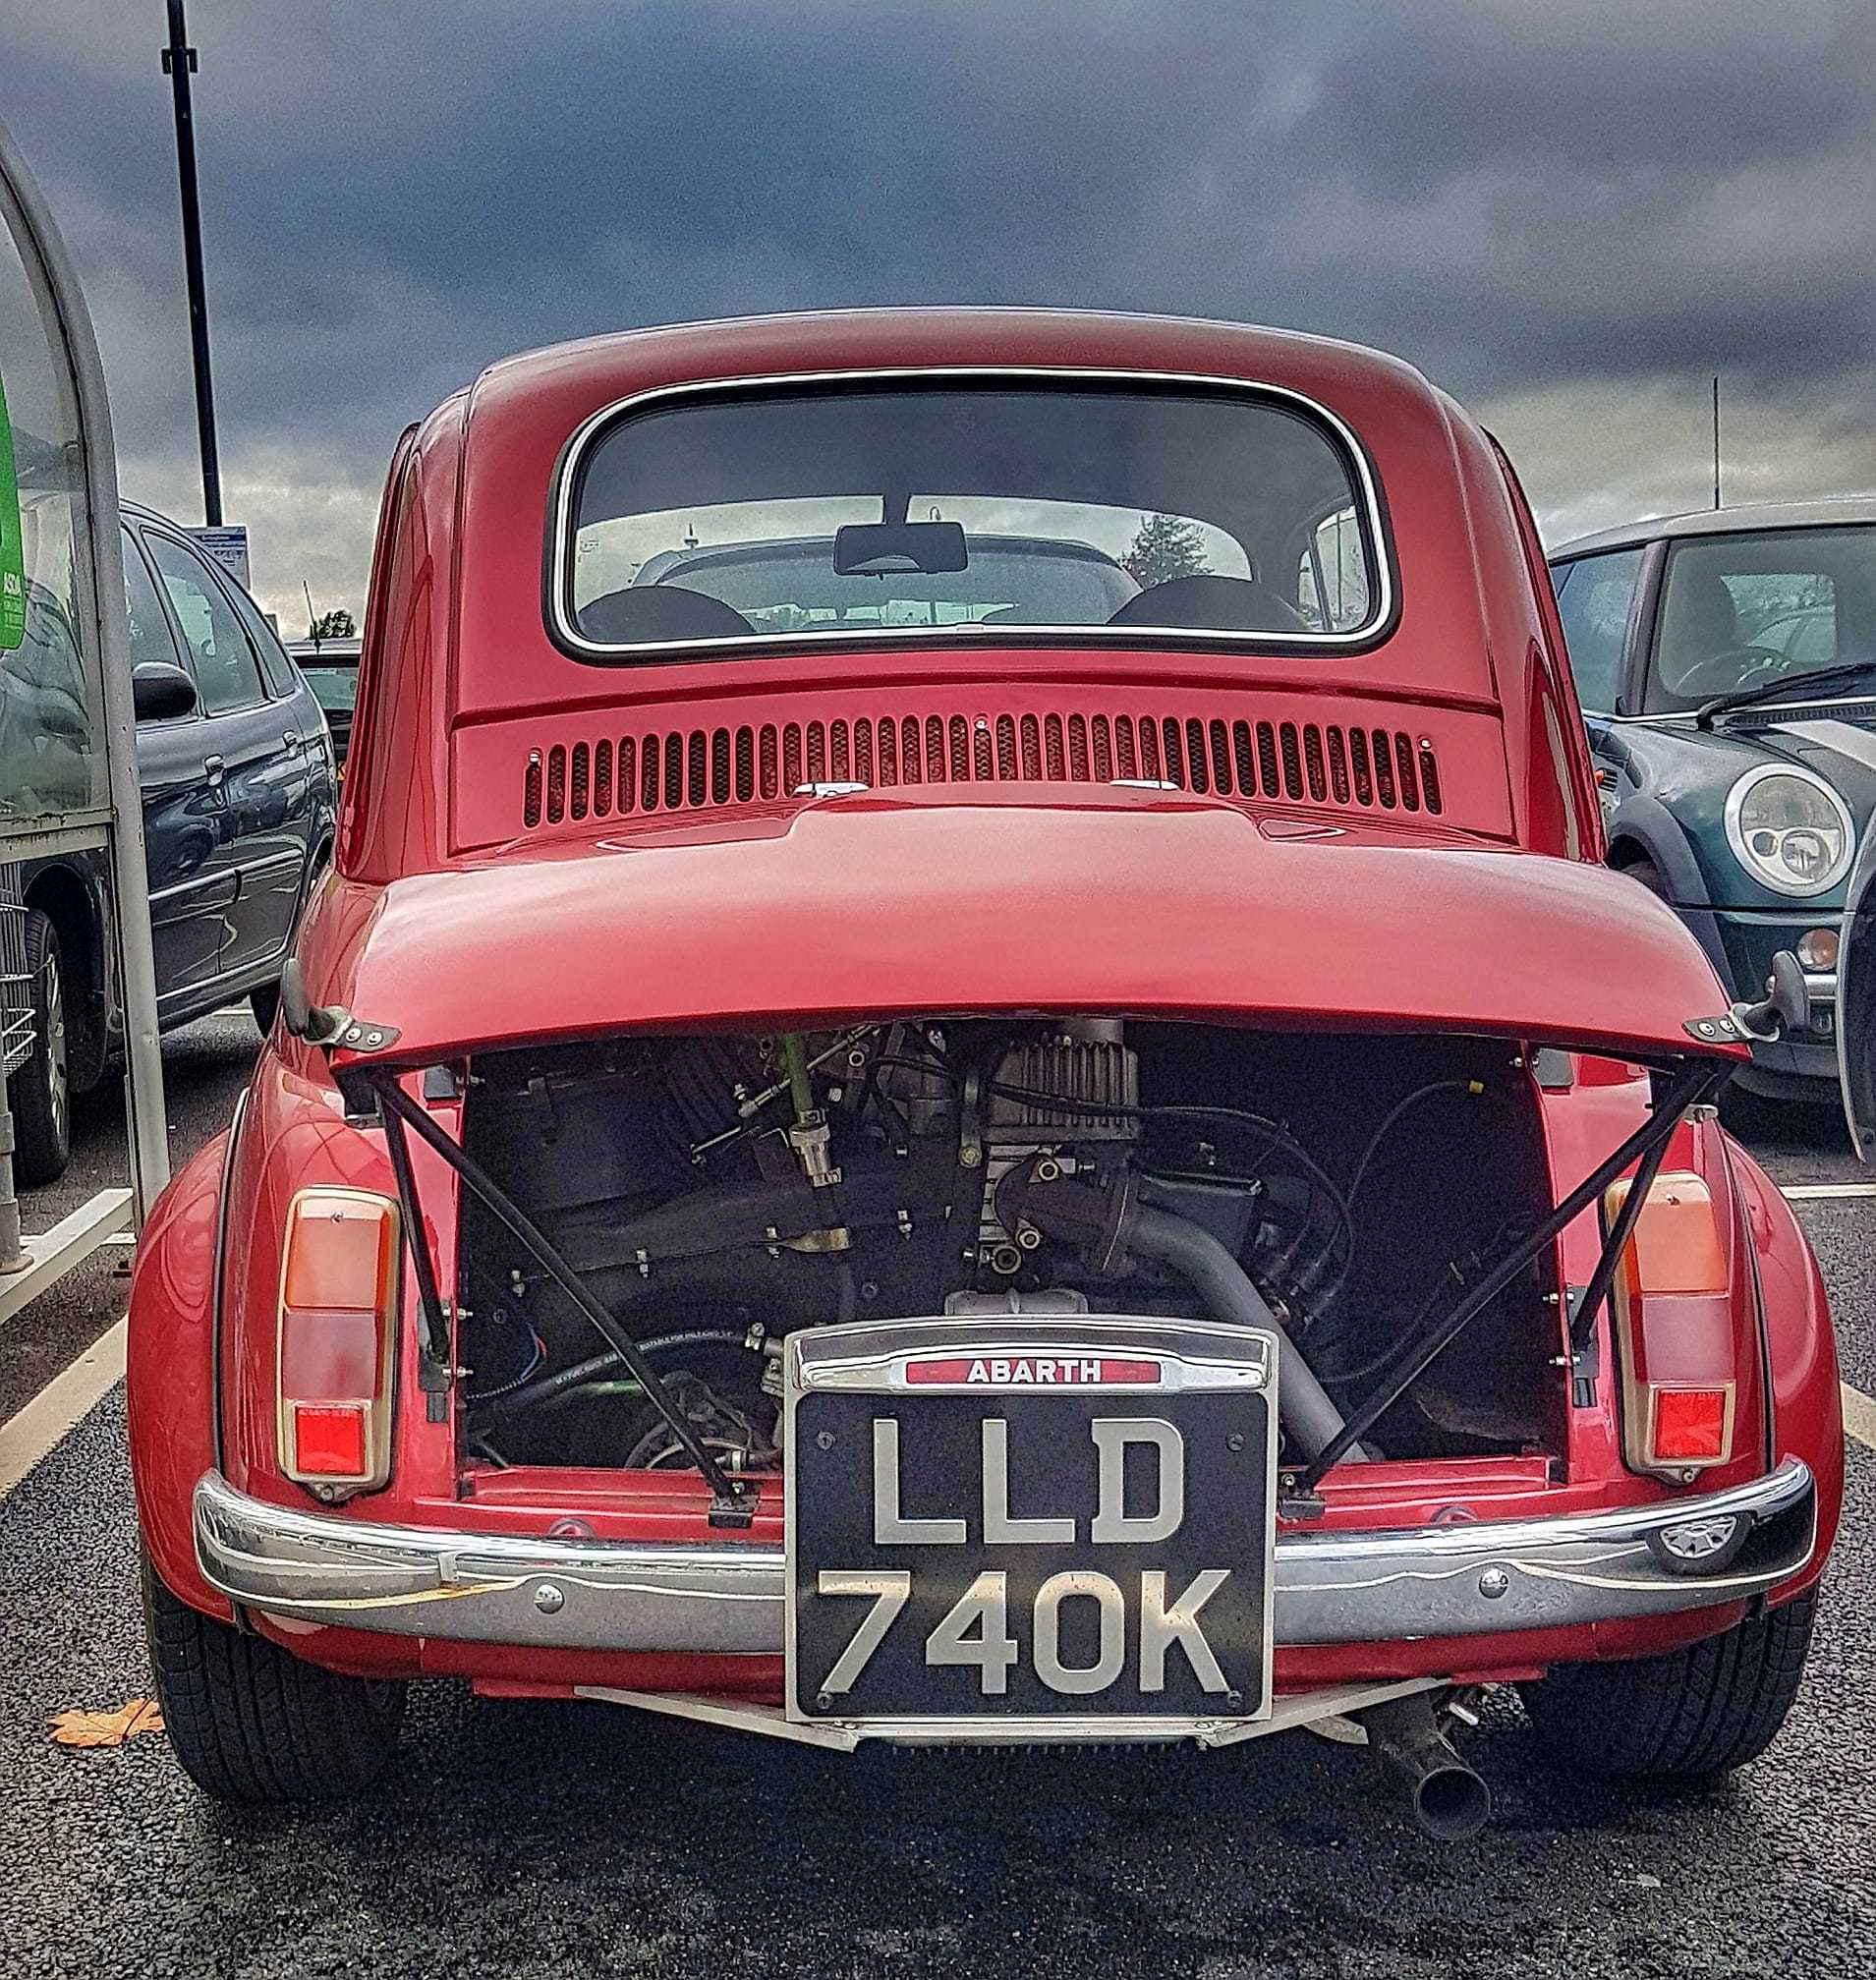 A Fiat 500 at Broughton Park by Donna Maria Long